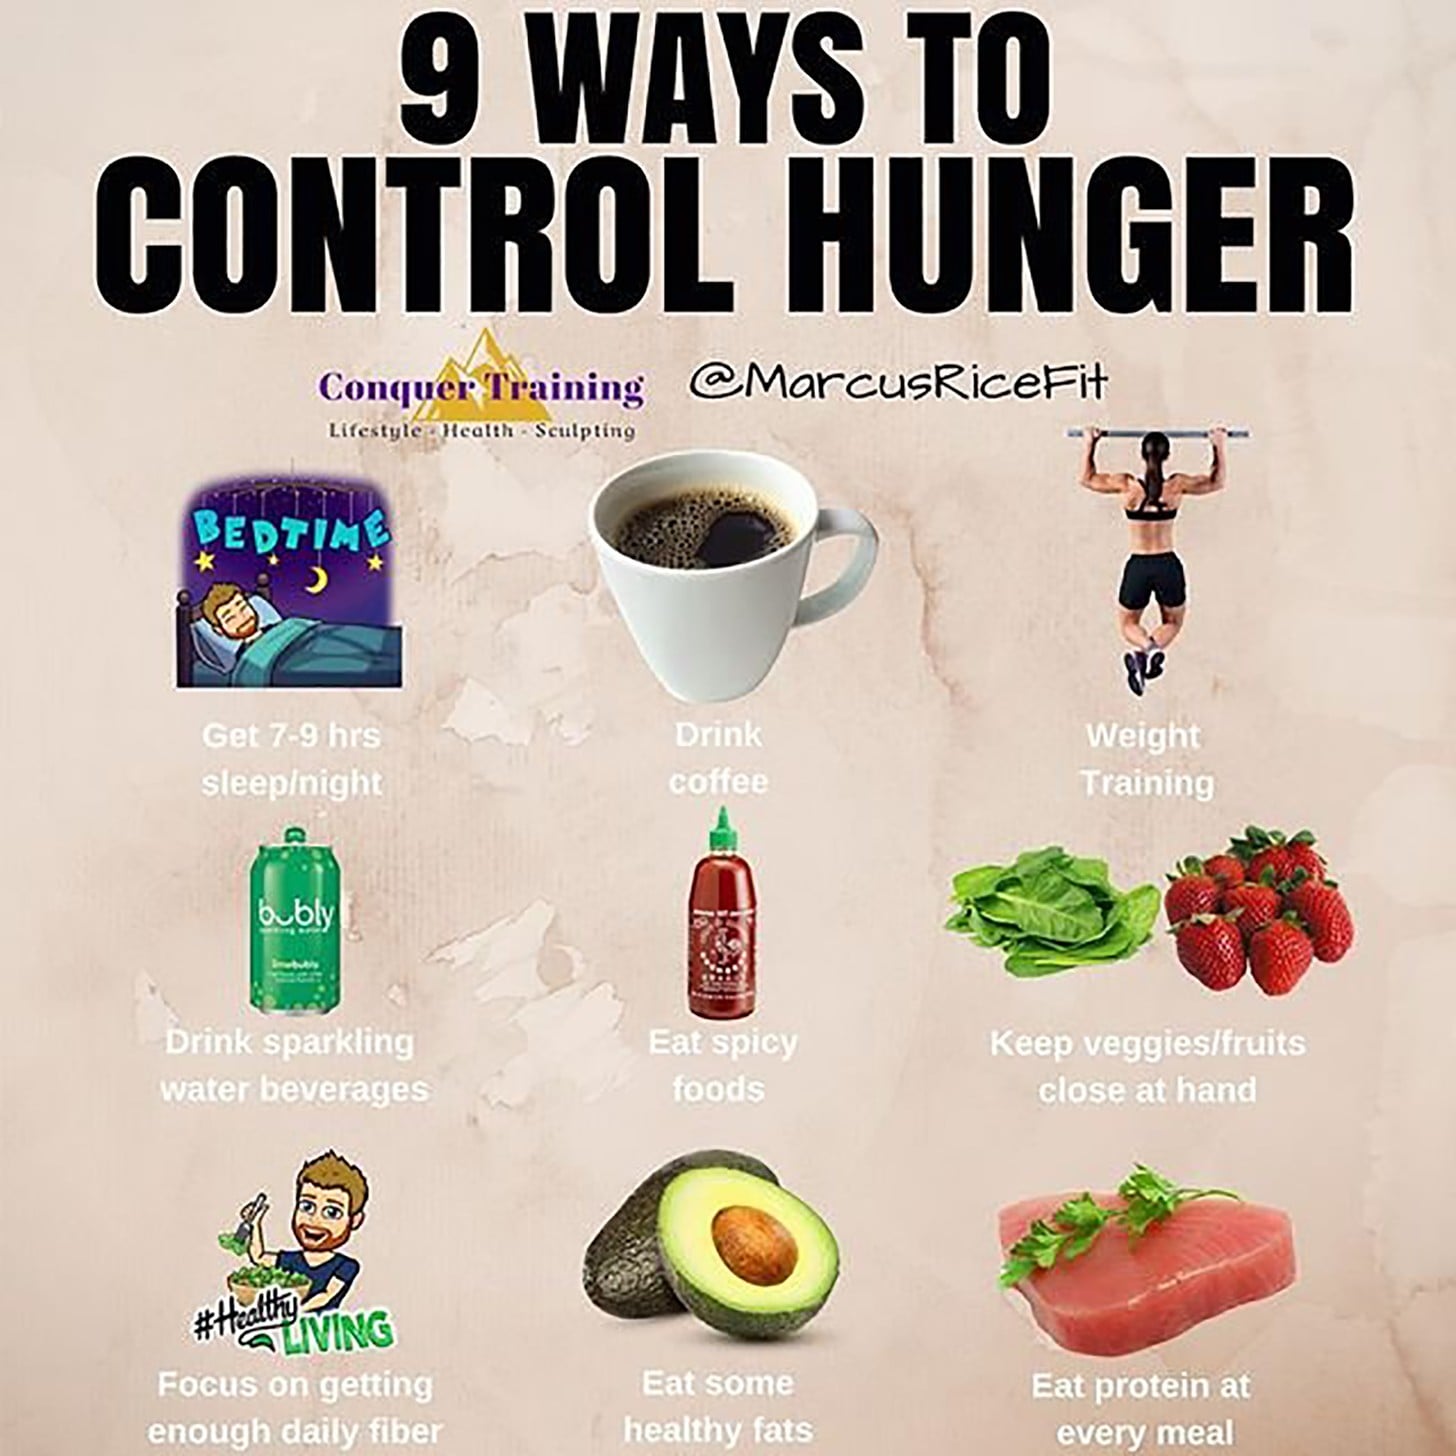 Simple tips for appetite control